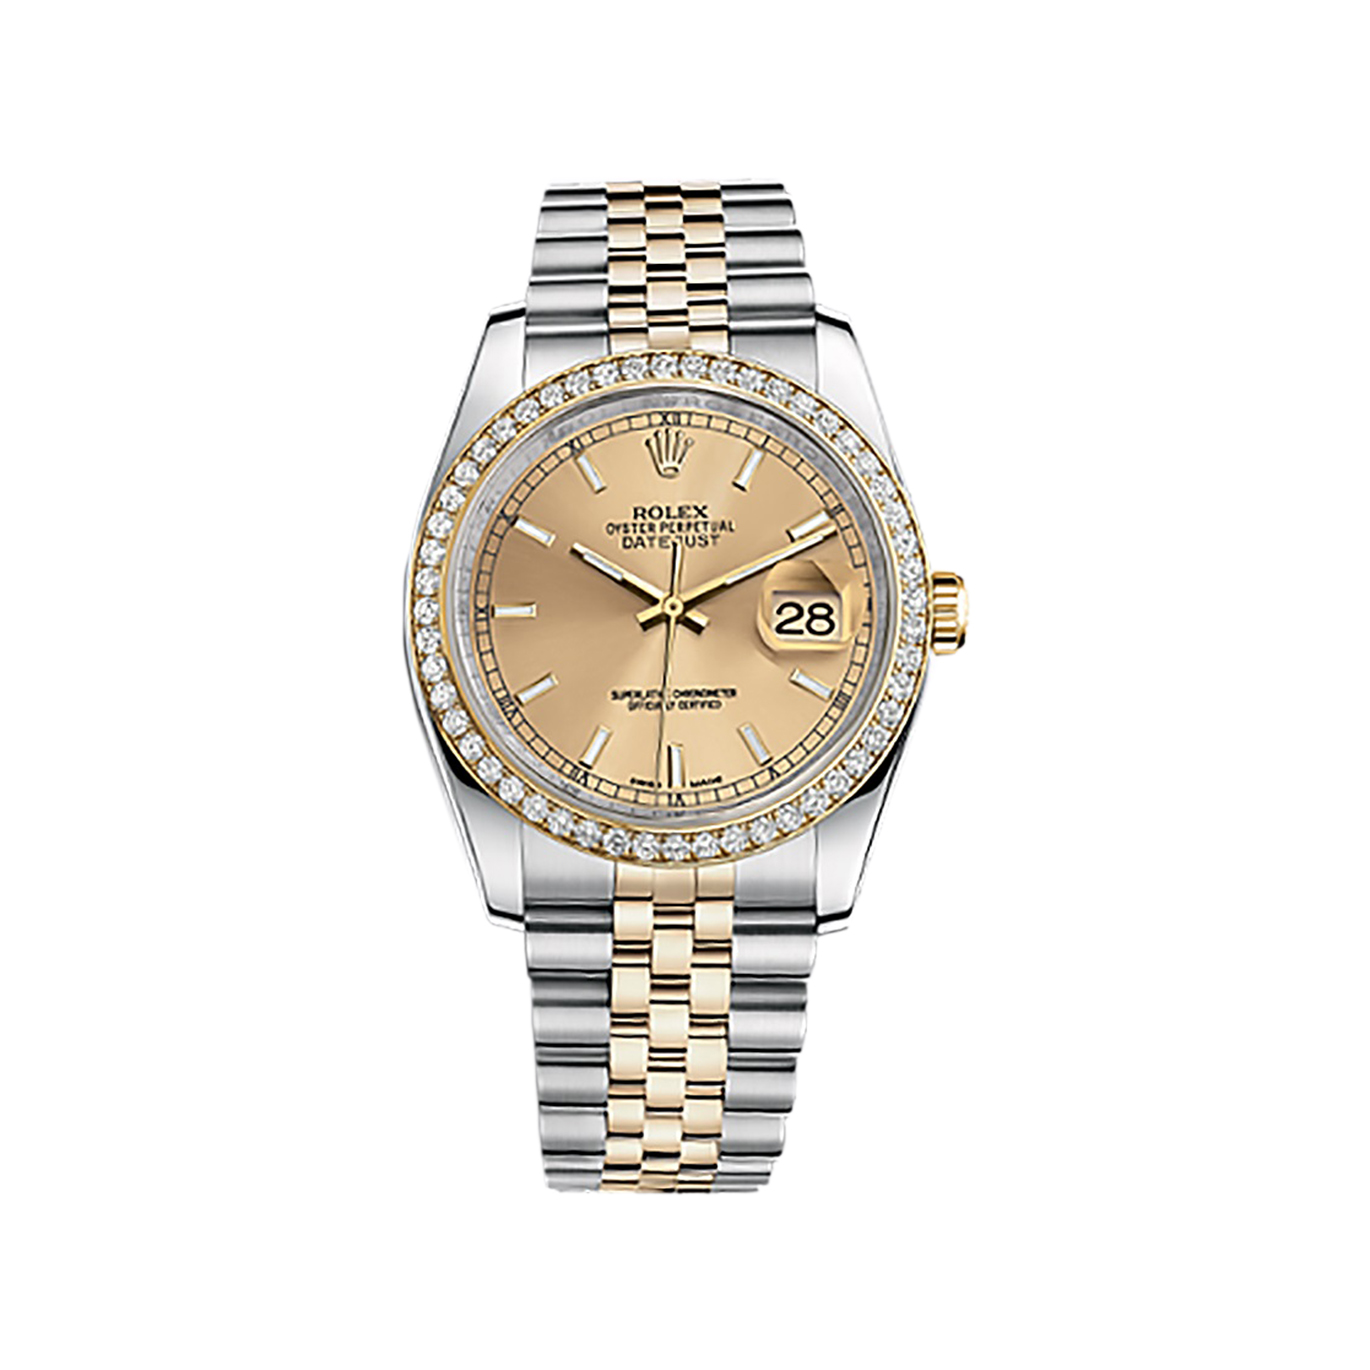 Datejust 36 116243 Gold & Stainless Steel Watch (Champagne)